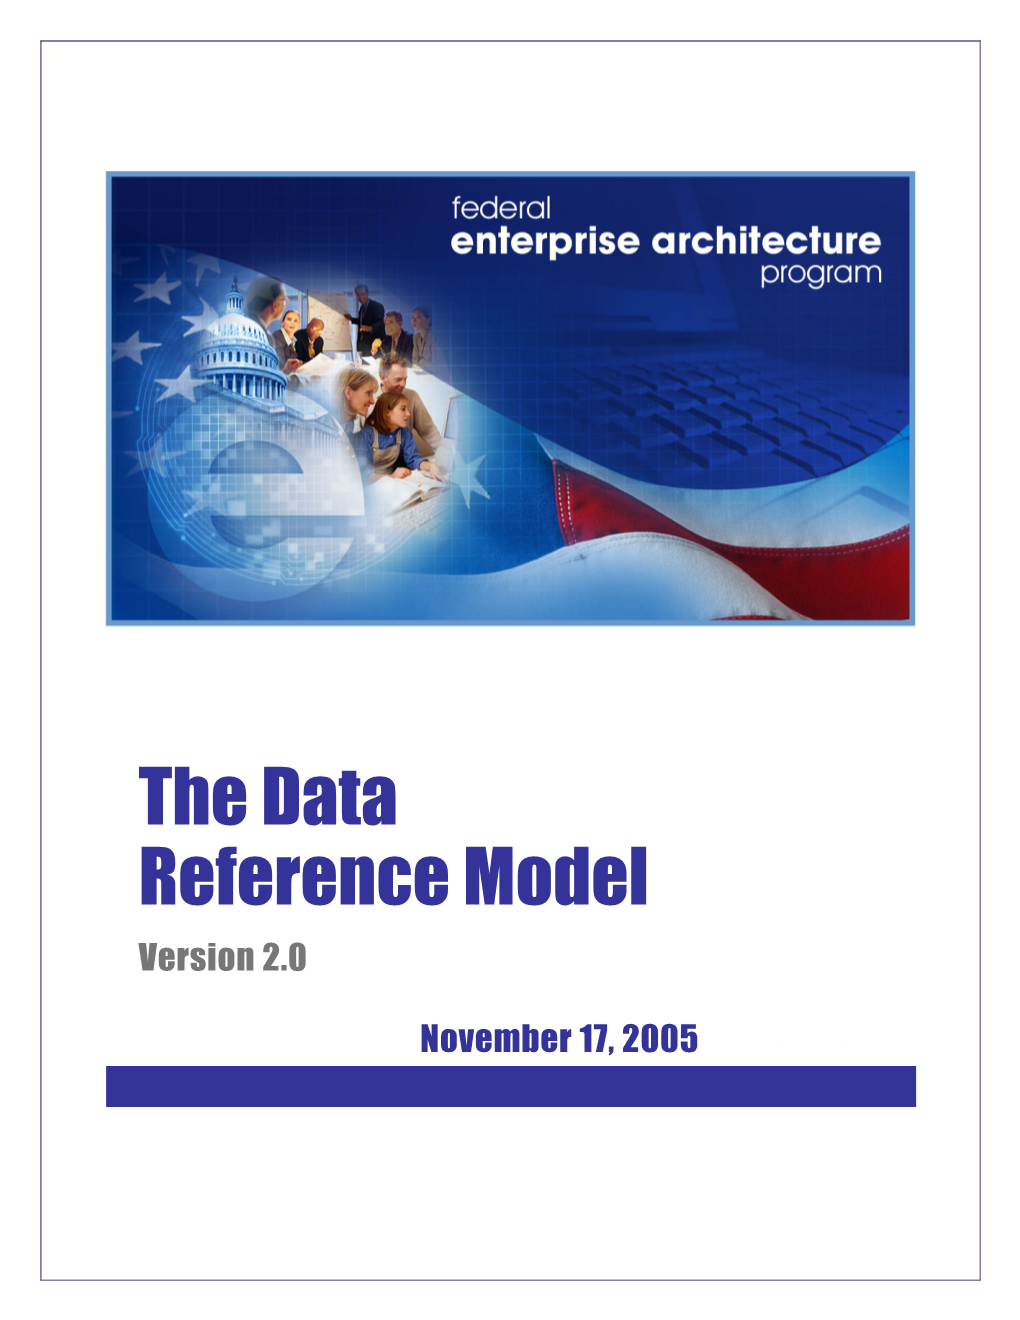 The Data Reference Model Version 2.0